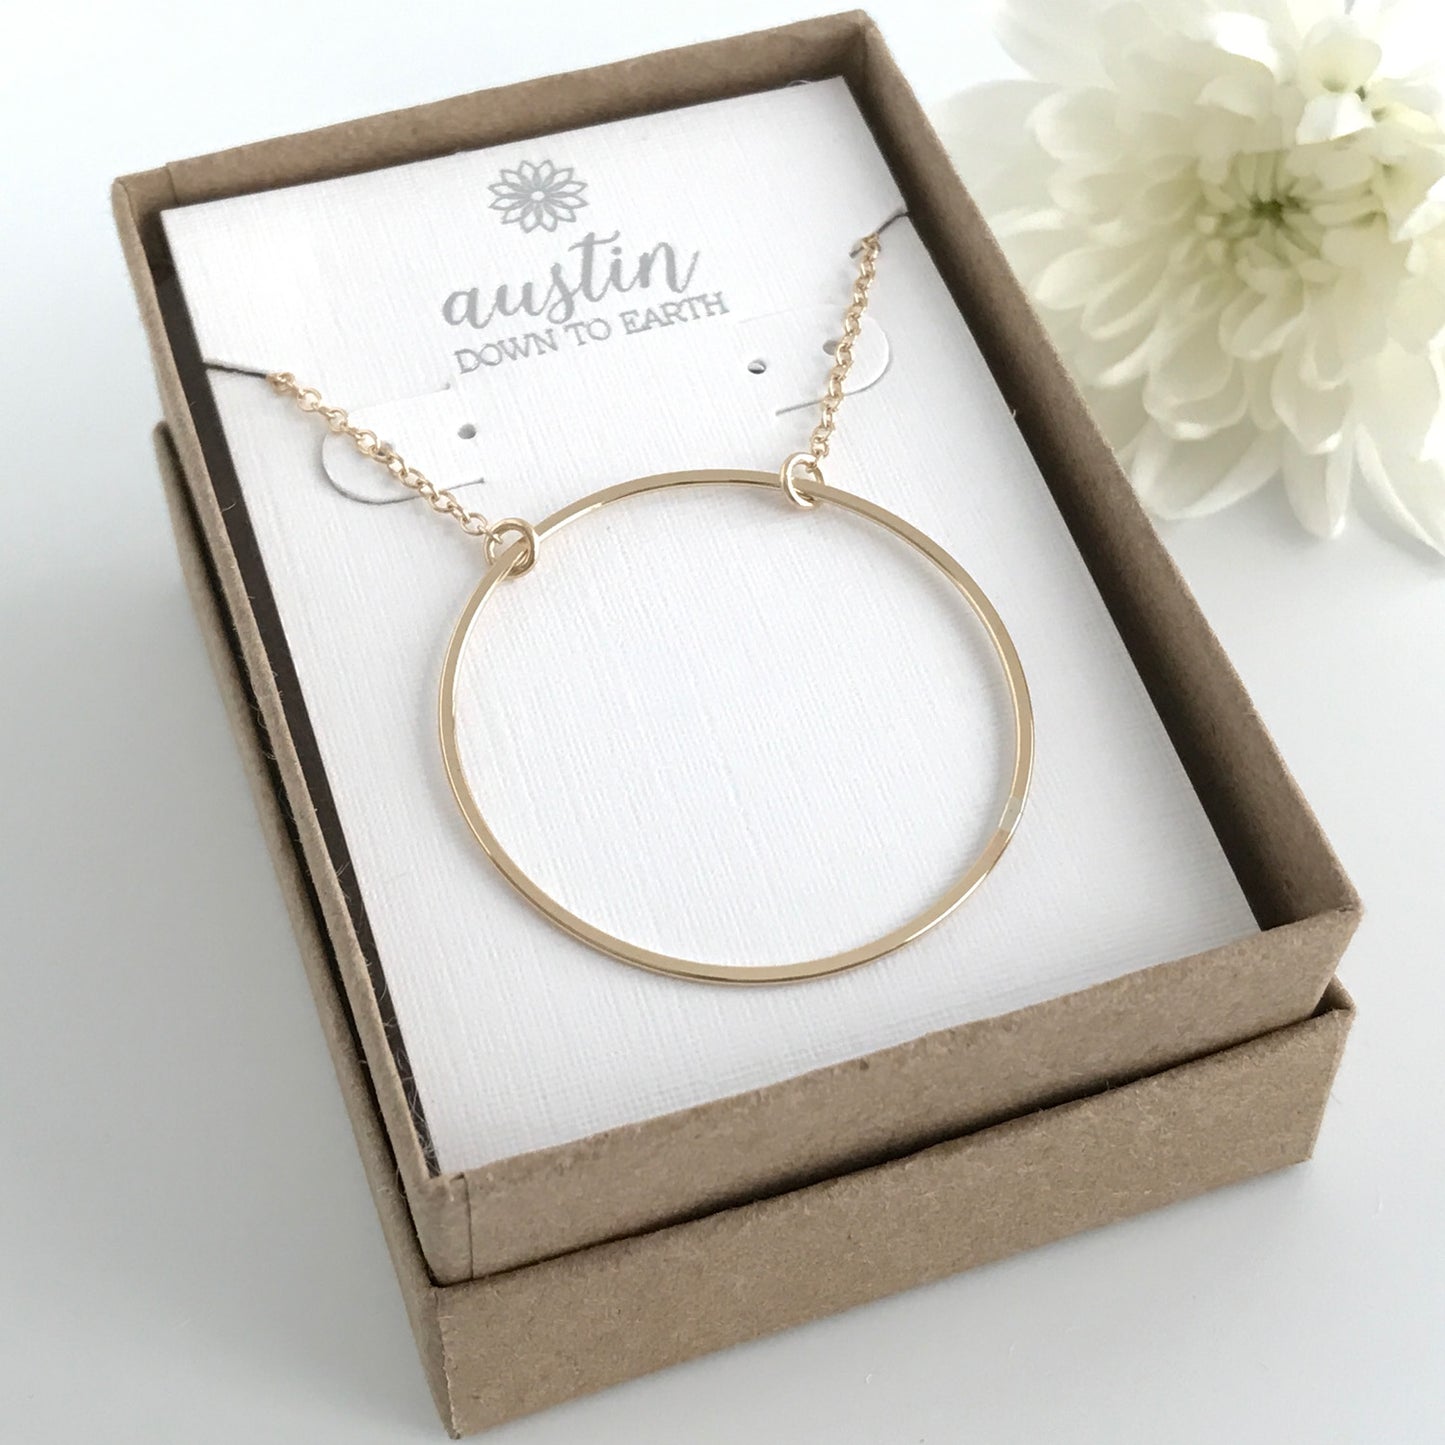 Large Circle Necklace - Available in Sterling Silver and 14k Gold Filled